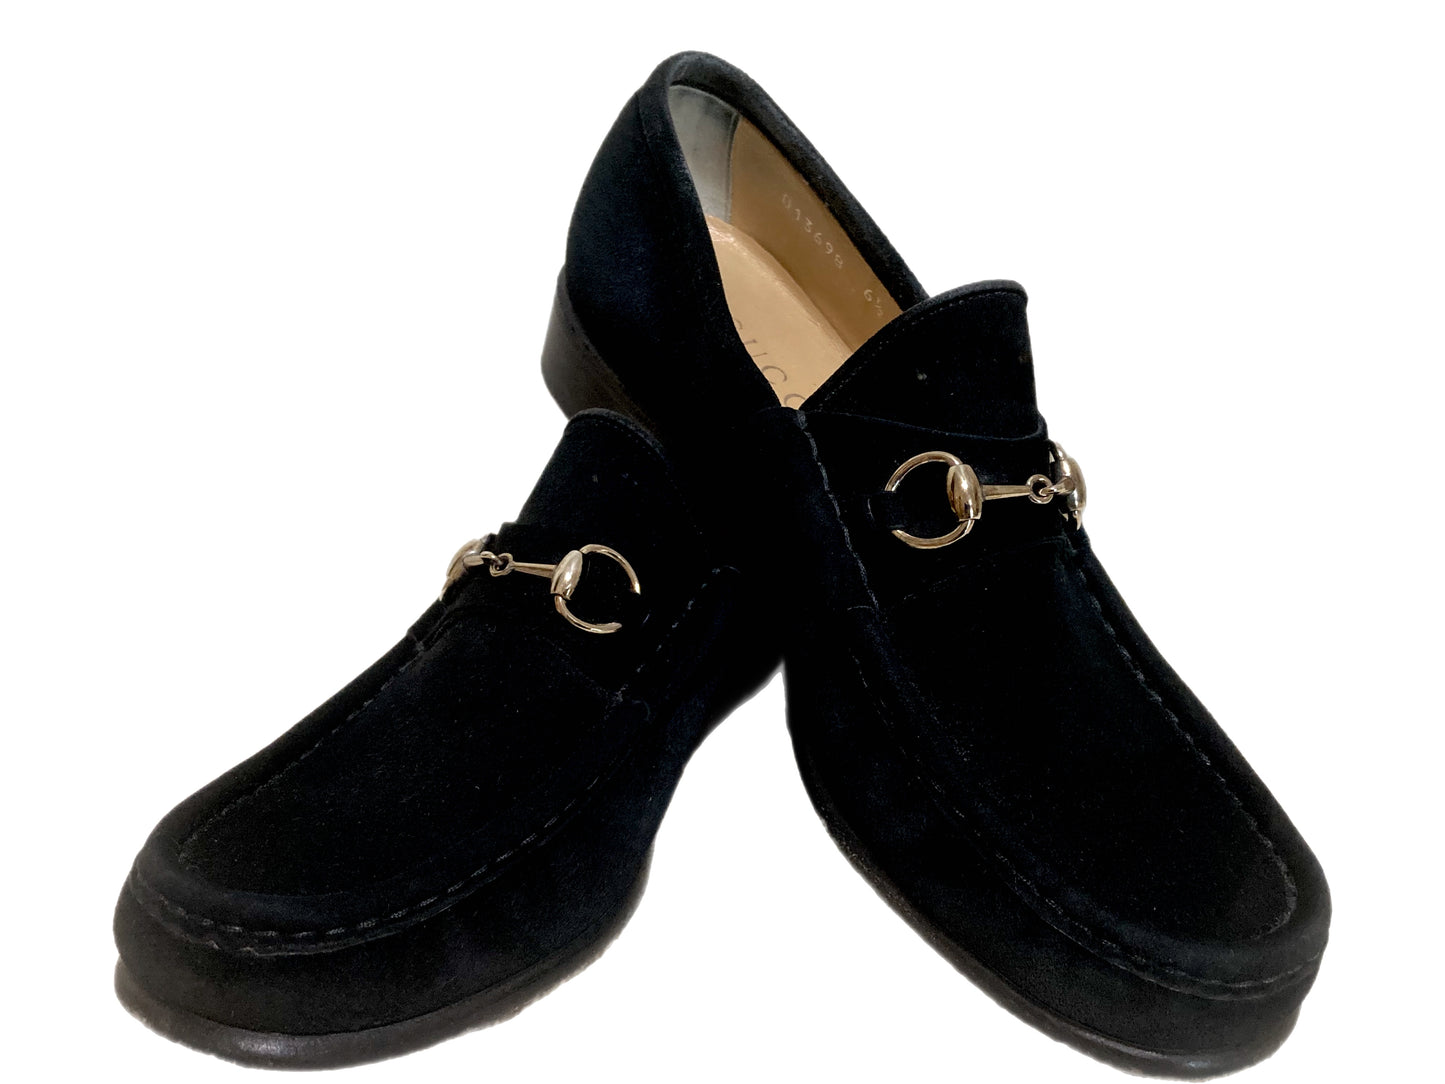 GUCCI Suede Horsebit Loafers Black Size 6.5